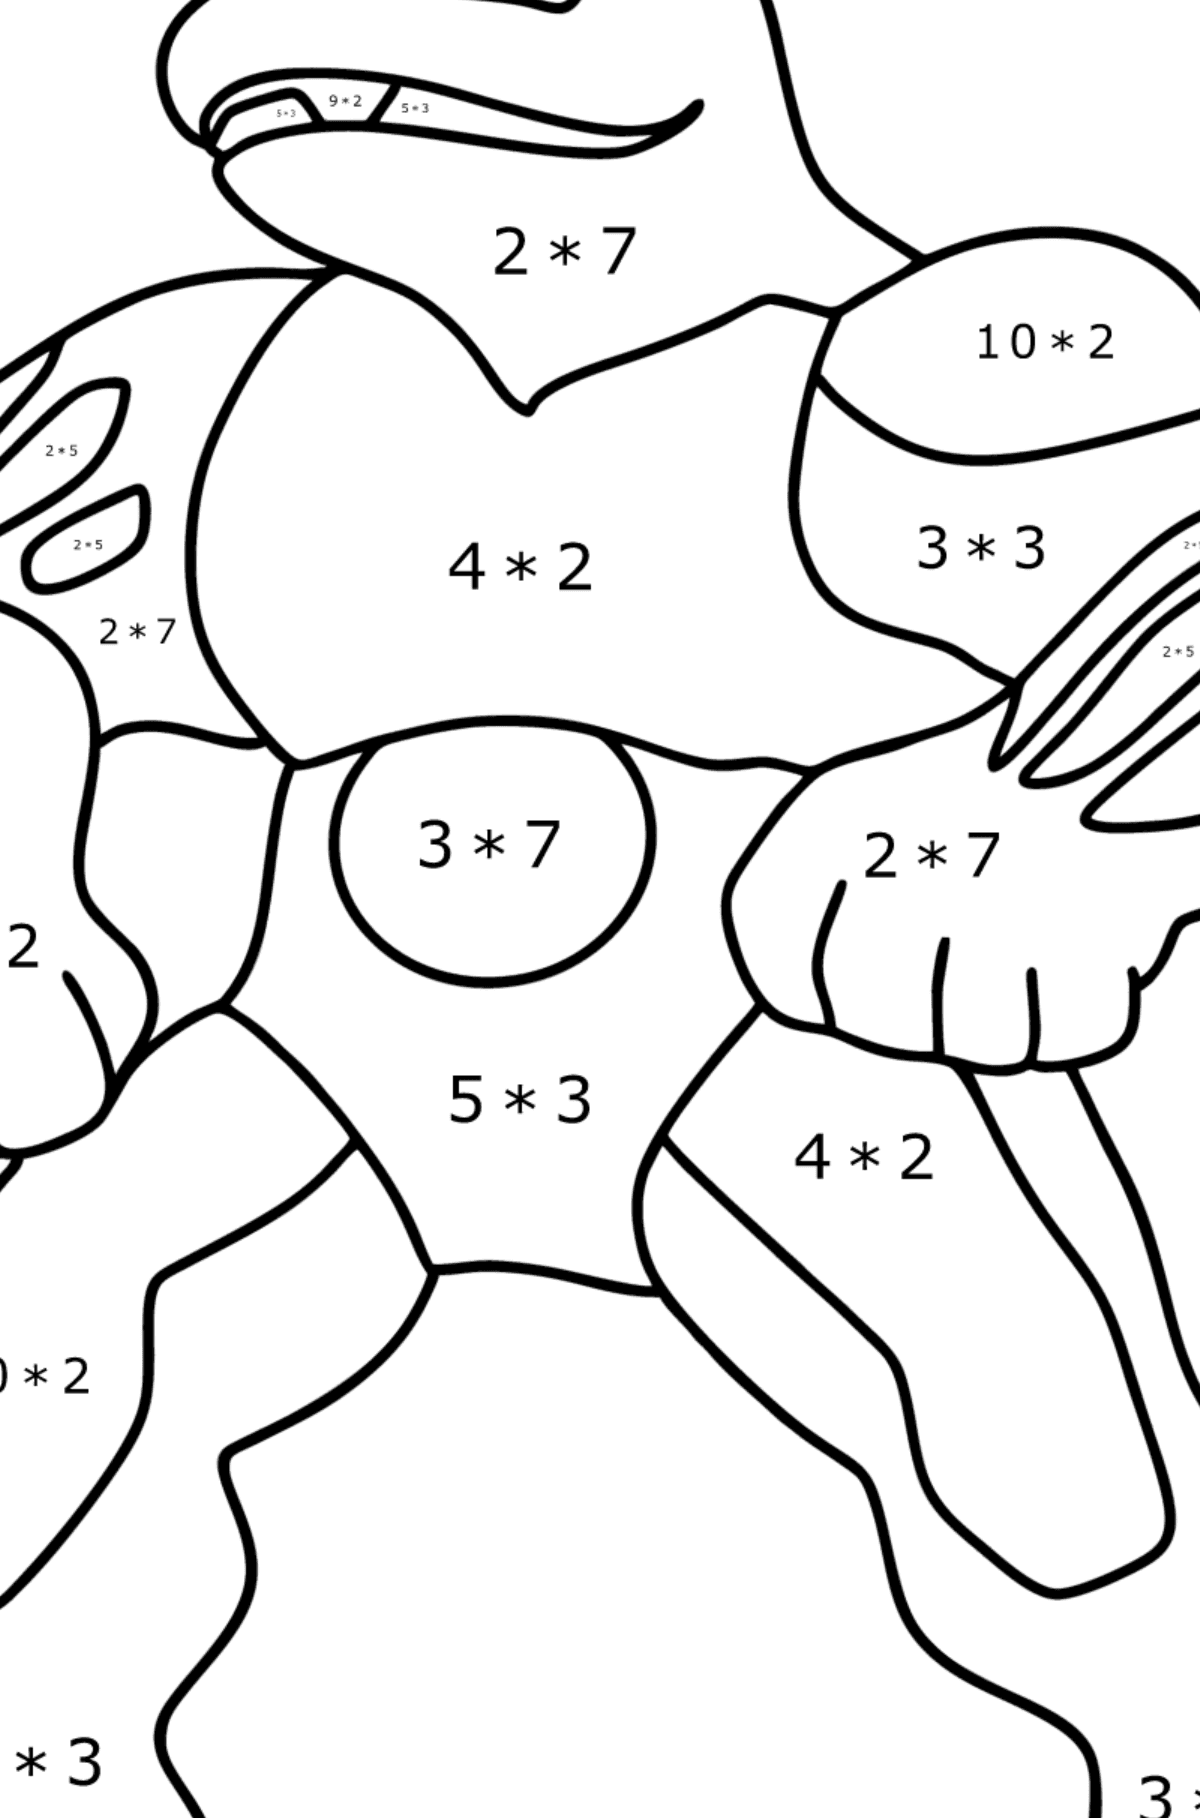 Coloring page Pokemon Go Machoke - Math Coloring - Multiplication for Kids